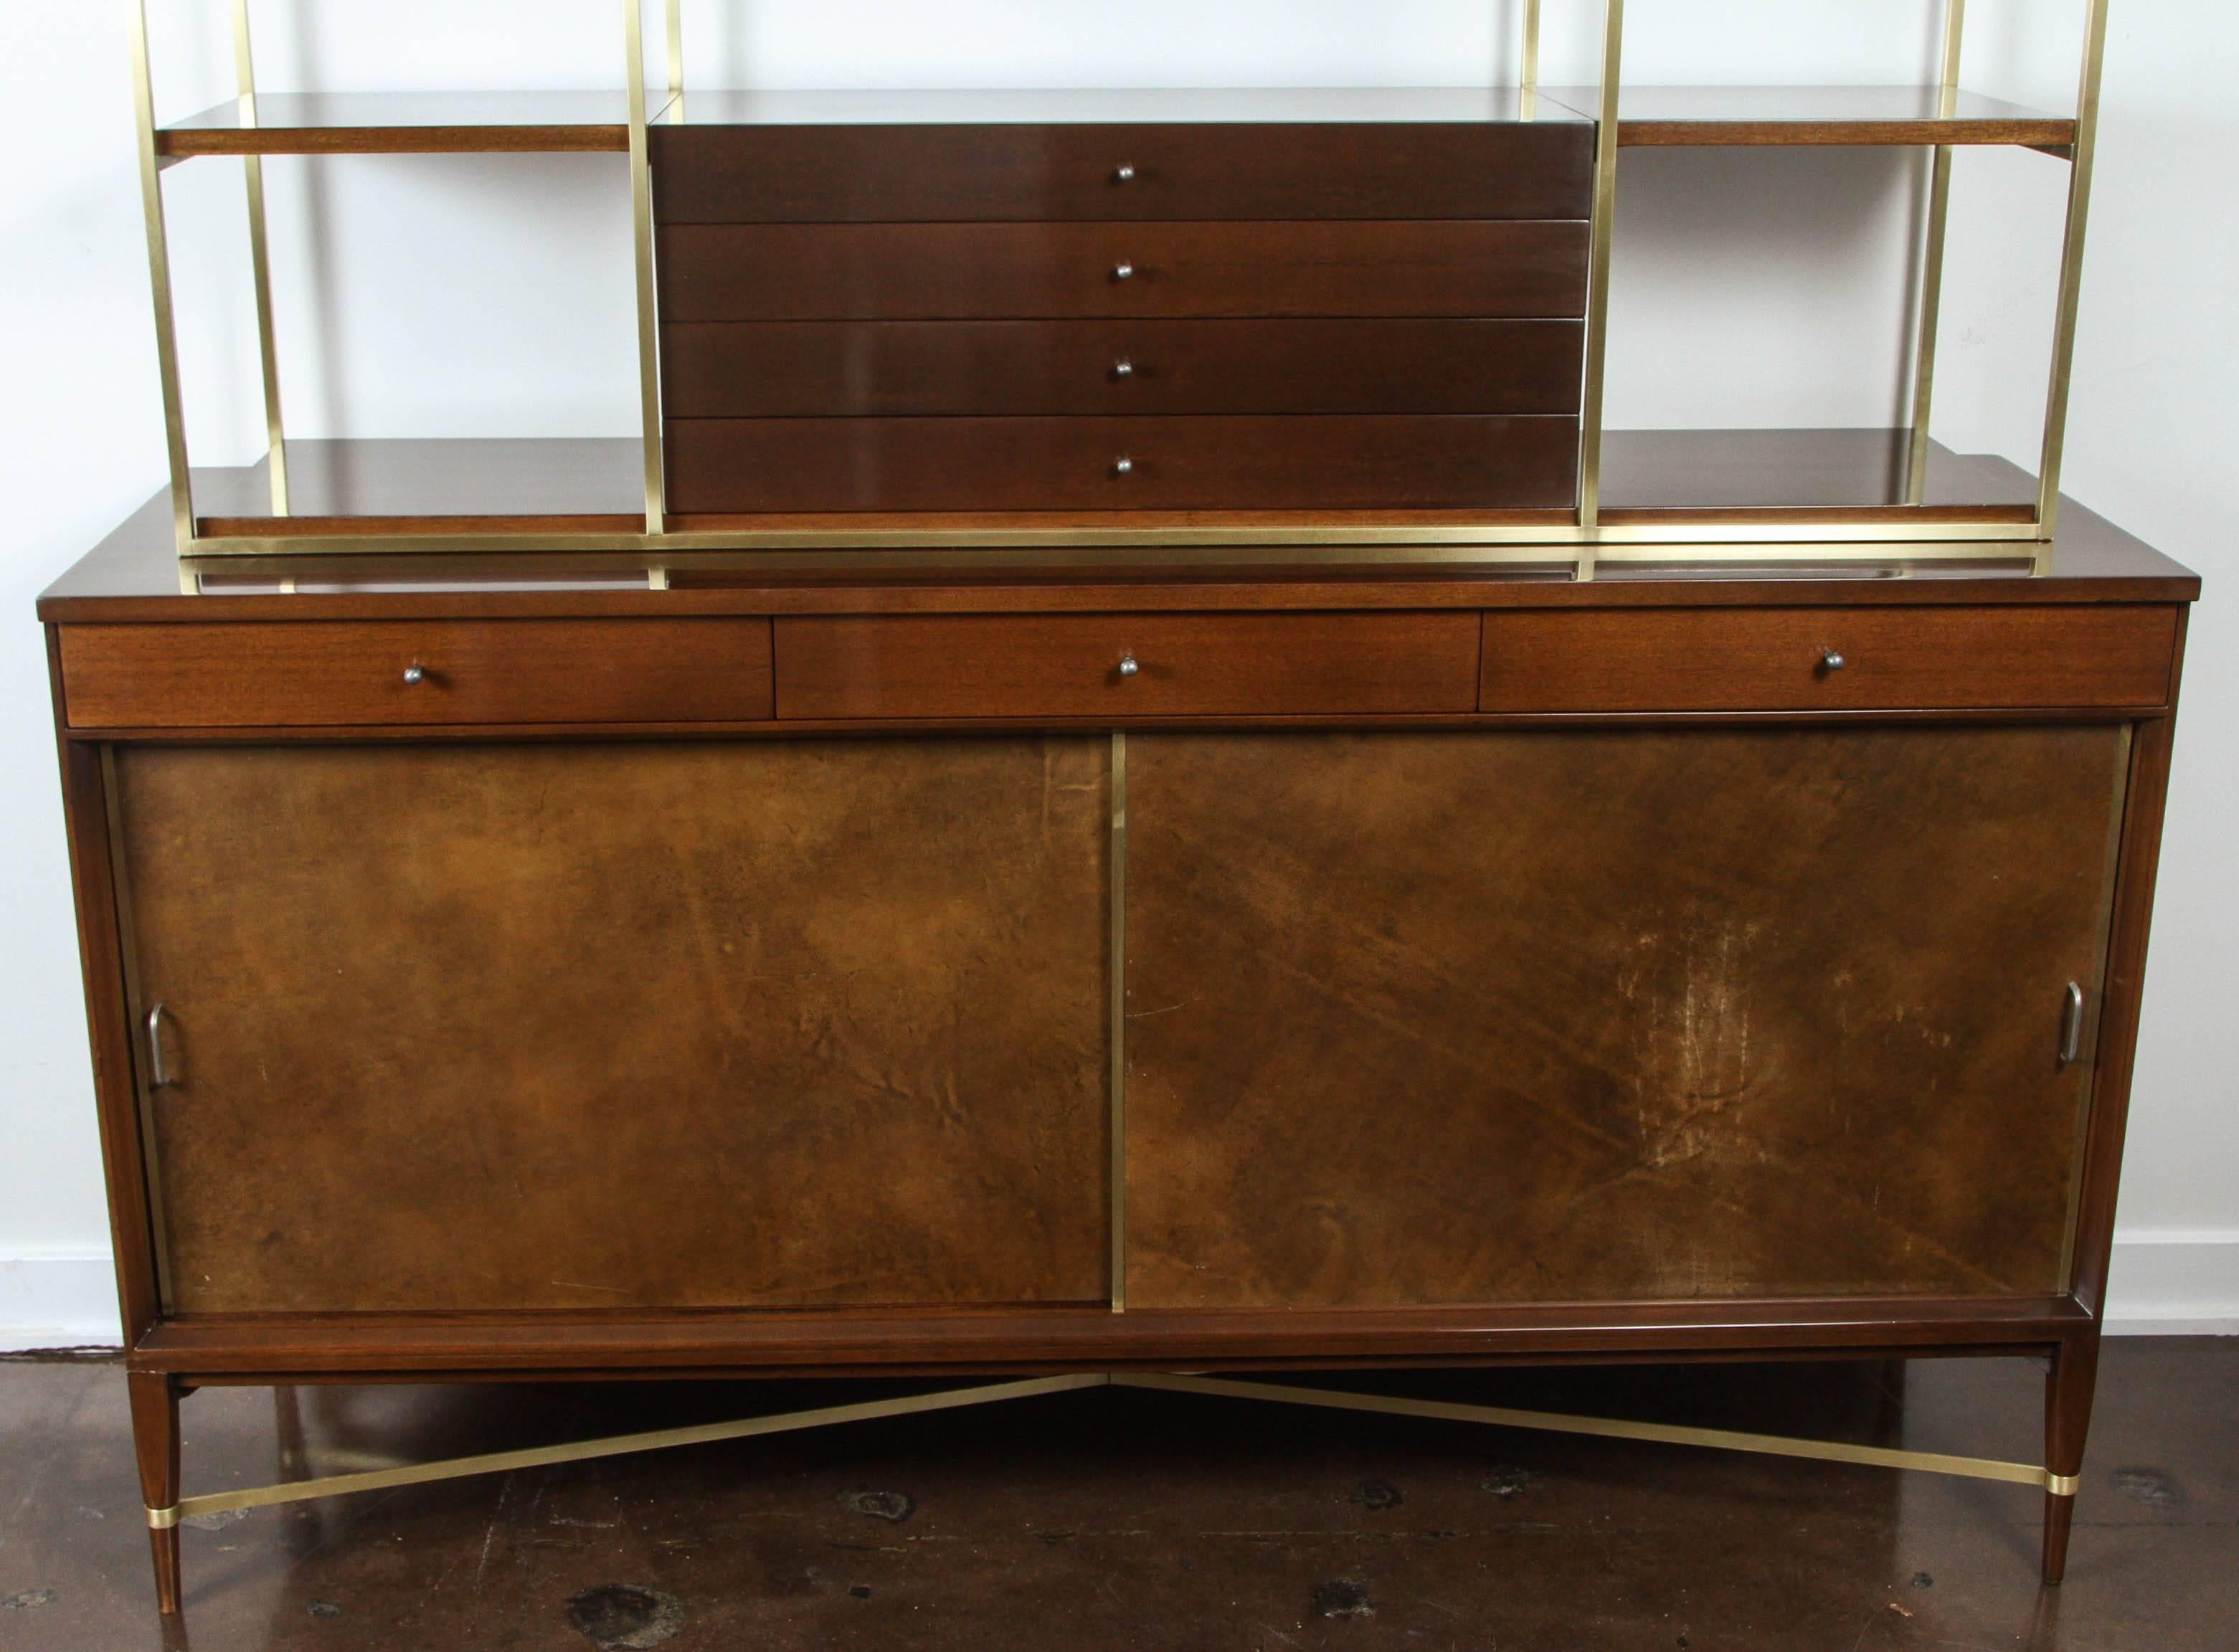 Handsome credenza with wall unit by Paul McCobb for the Calvin Group.

Leather doors and polished brass supports. Exceptional condition. Original tags inside drawers.